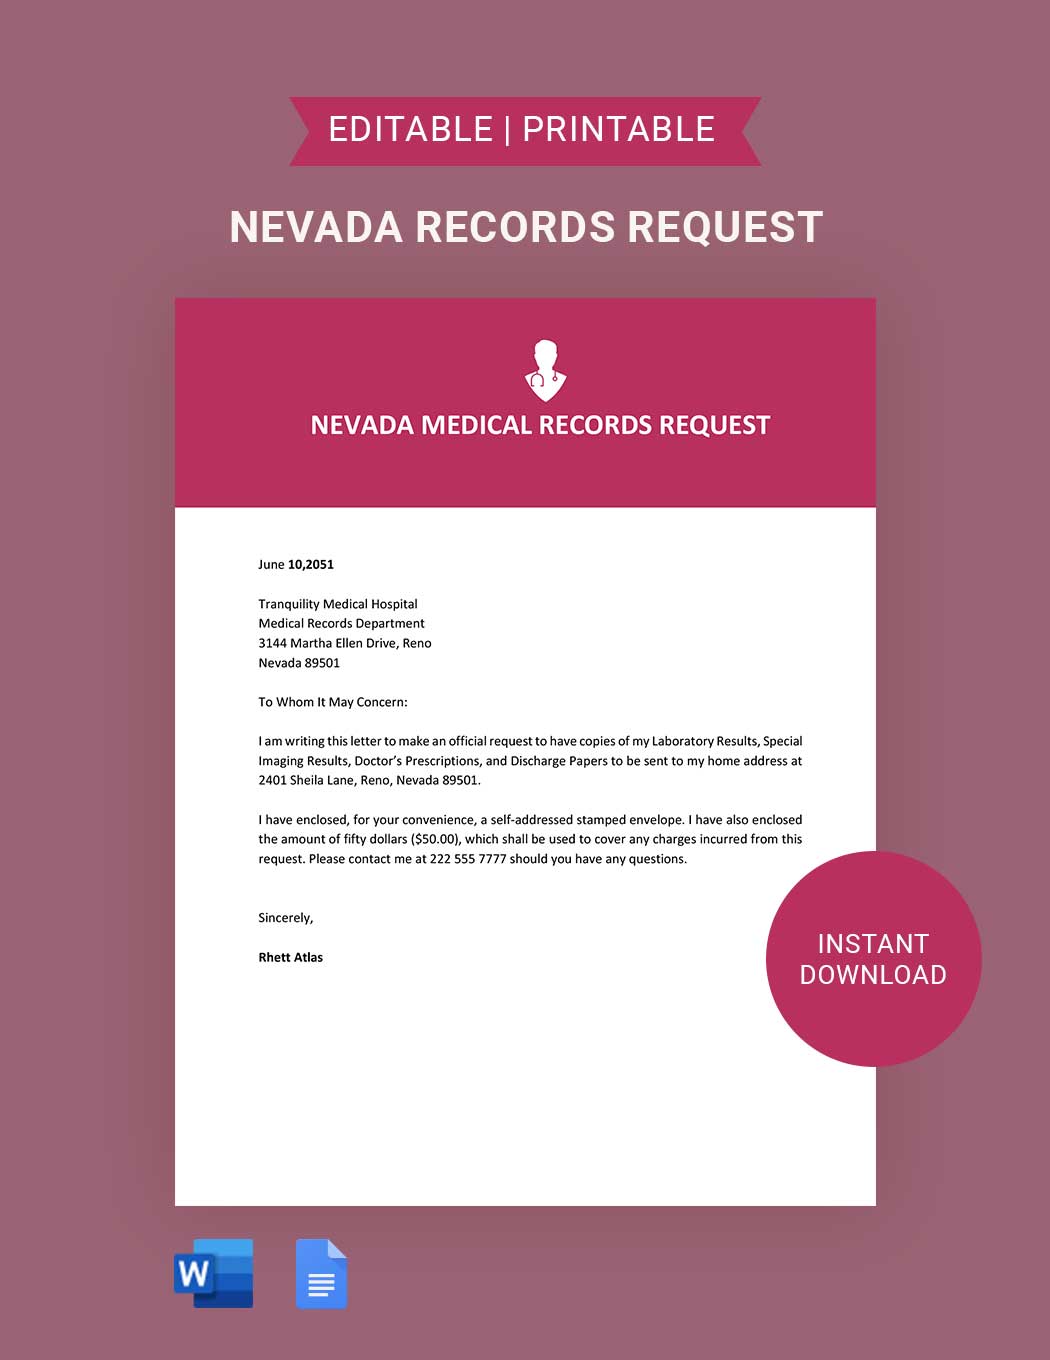 Nevada Medical Records Request Template in Word, Google Docs